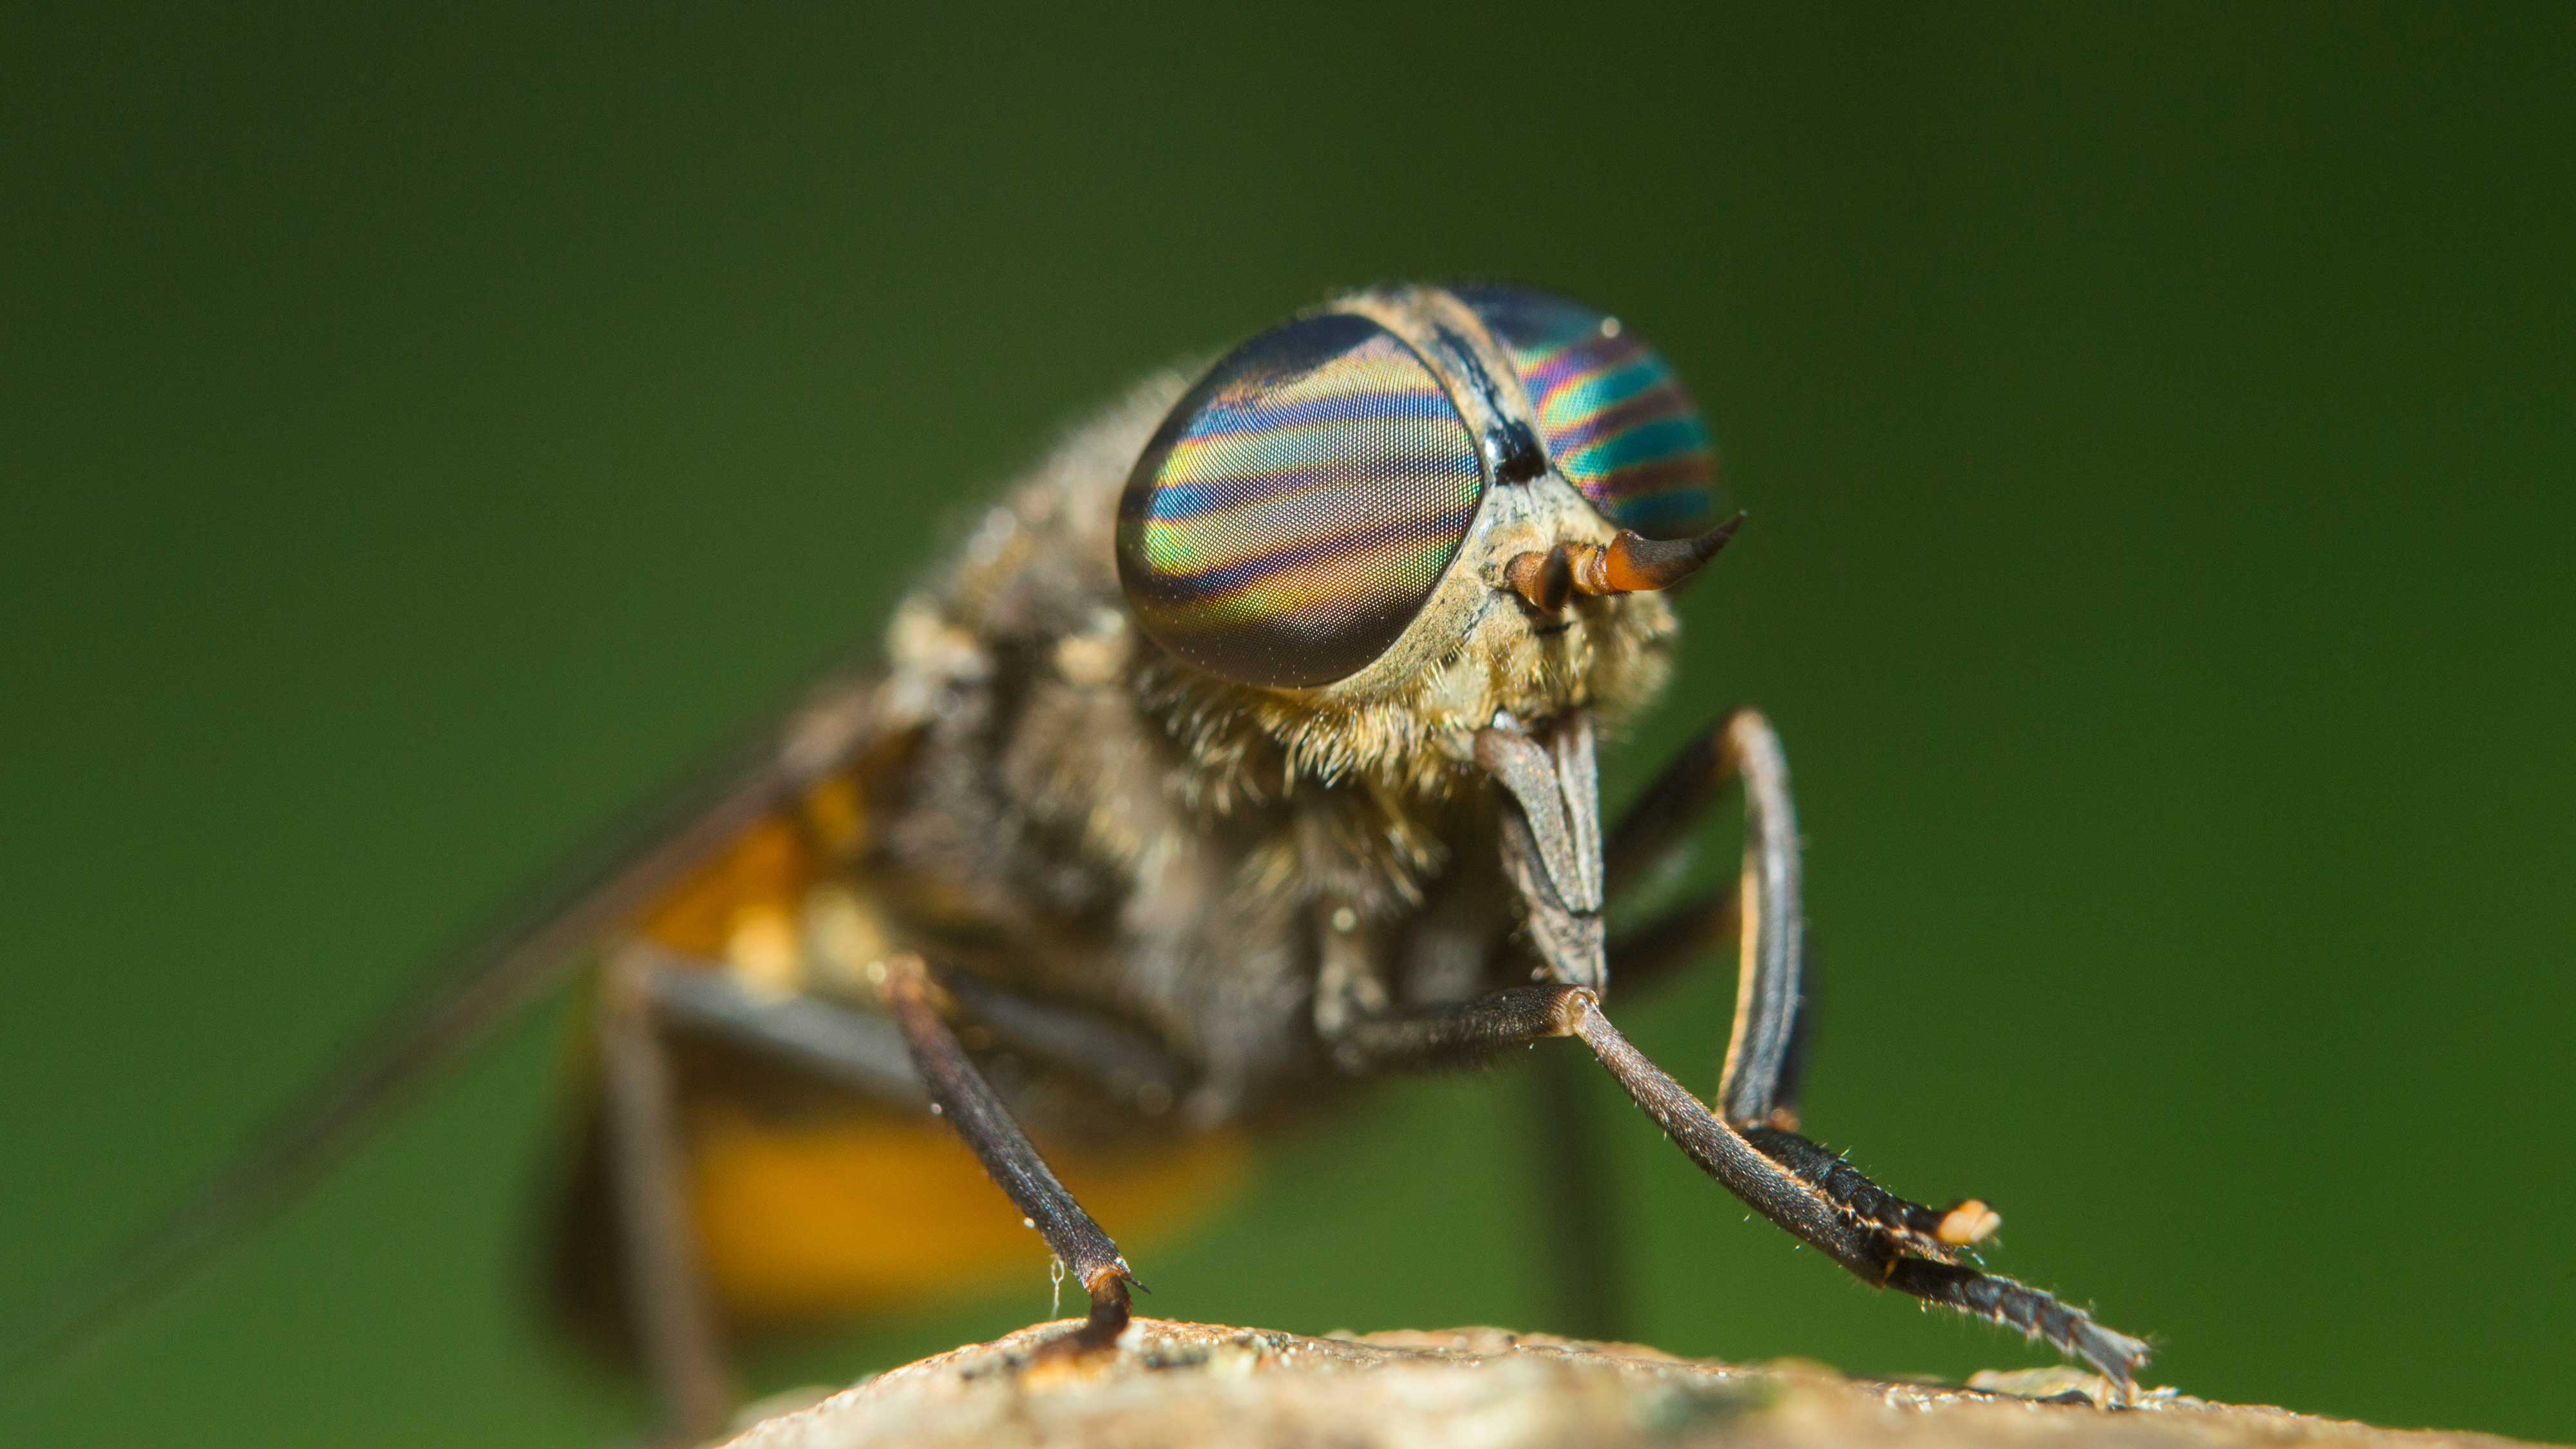 Close-up of a horse fly.